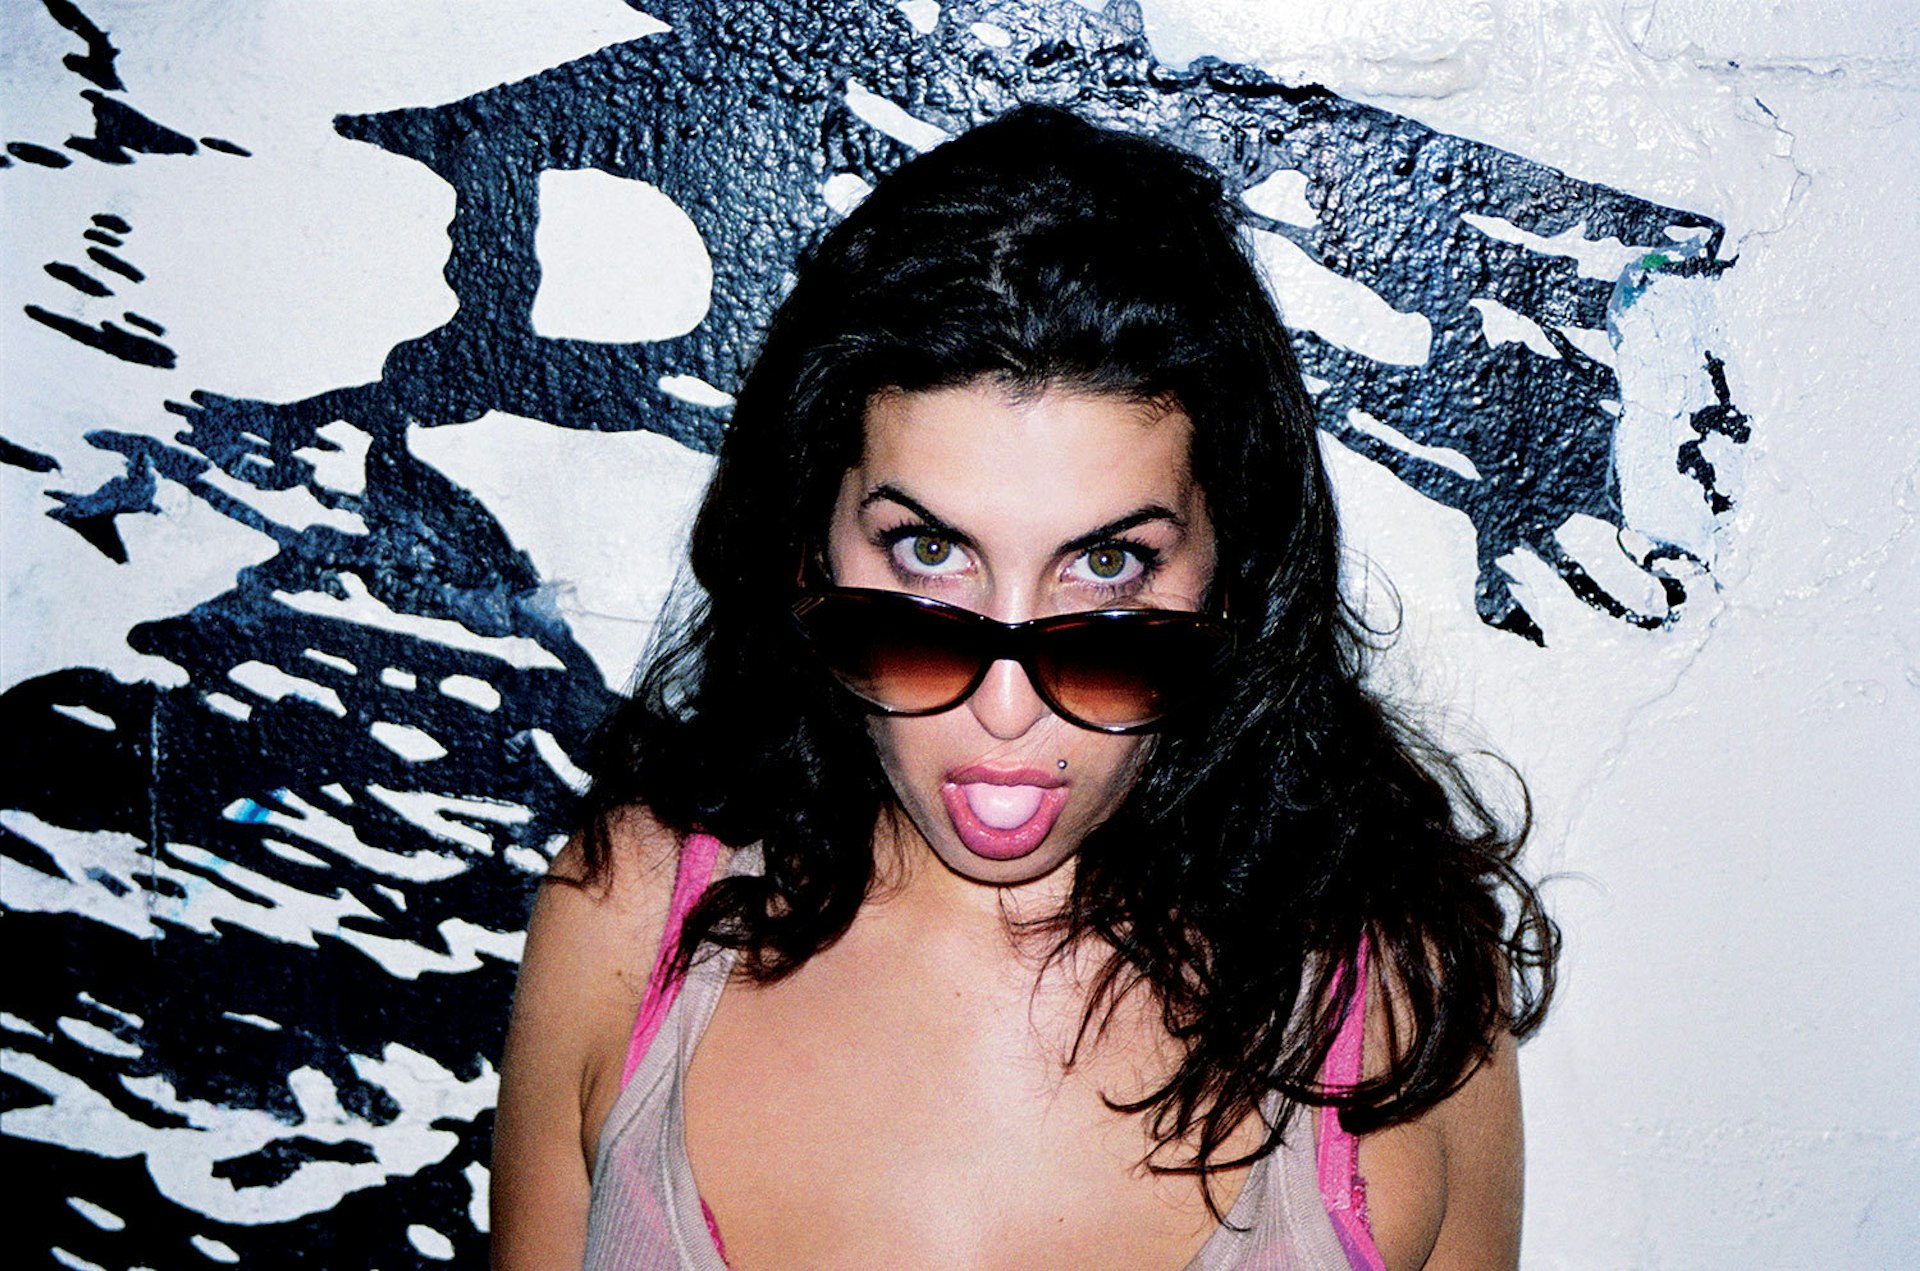 Before Frank: Amy Winehouse on the cusp of stardom